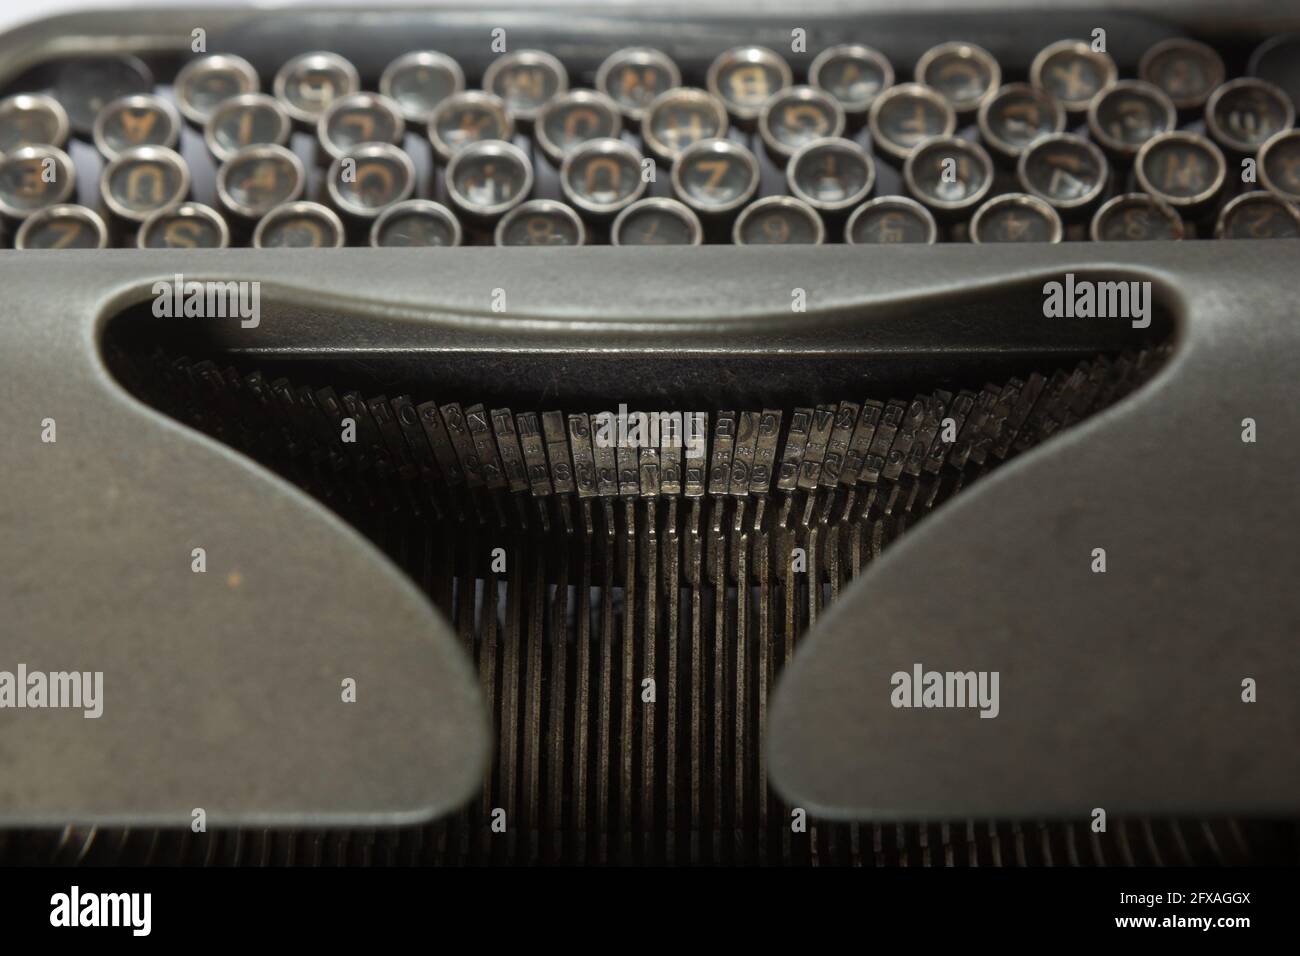 Old typewriter metal letters Stock Photo